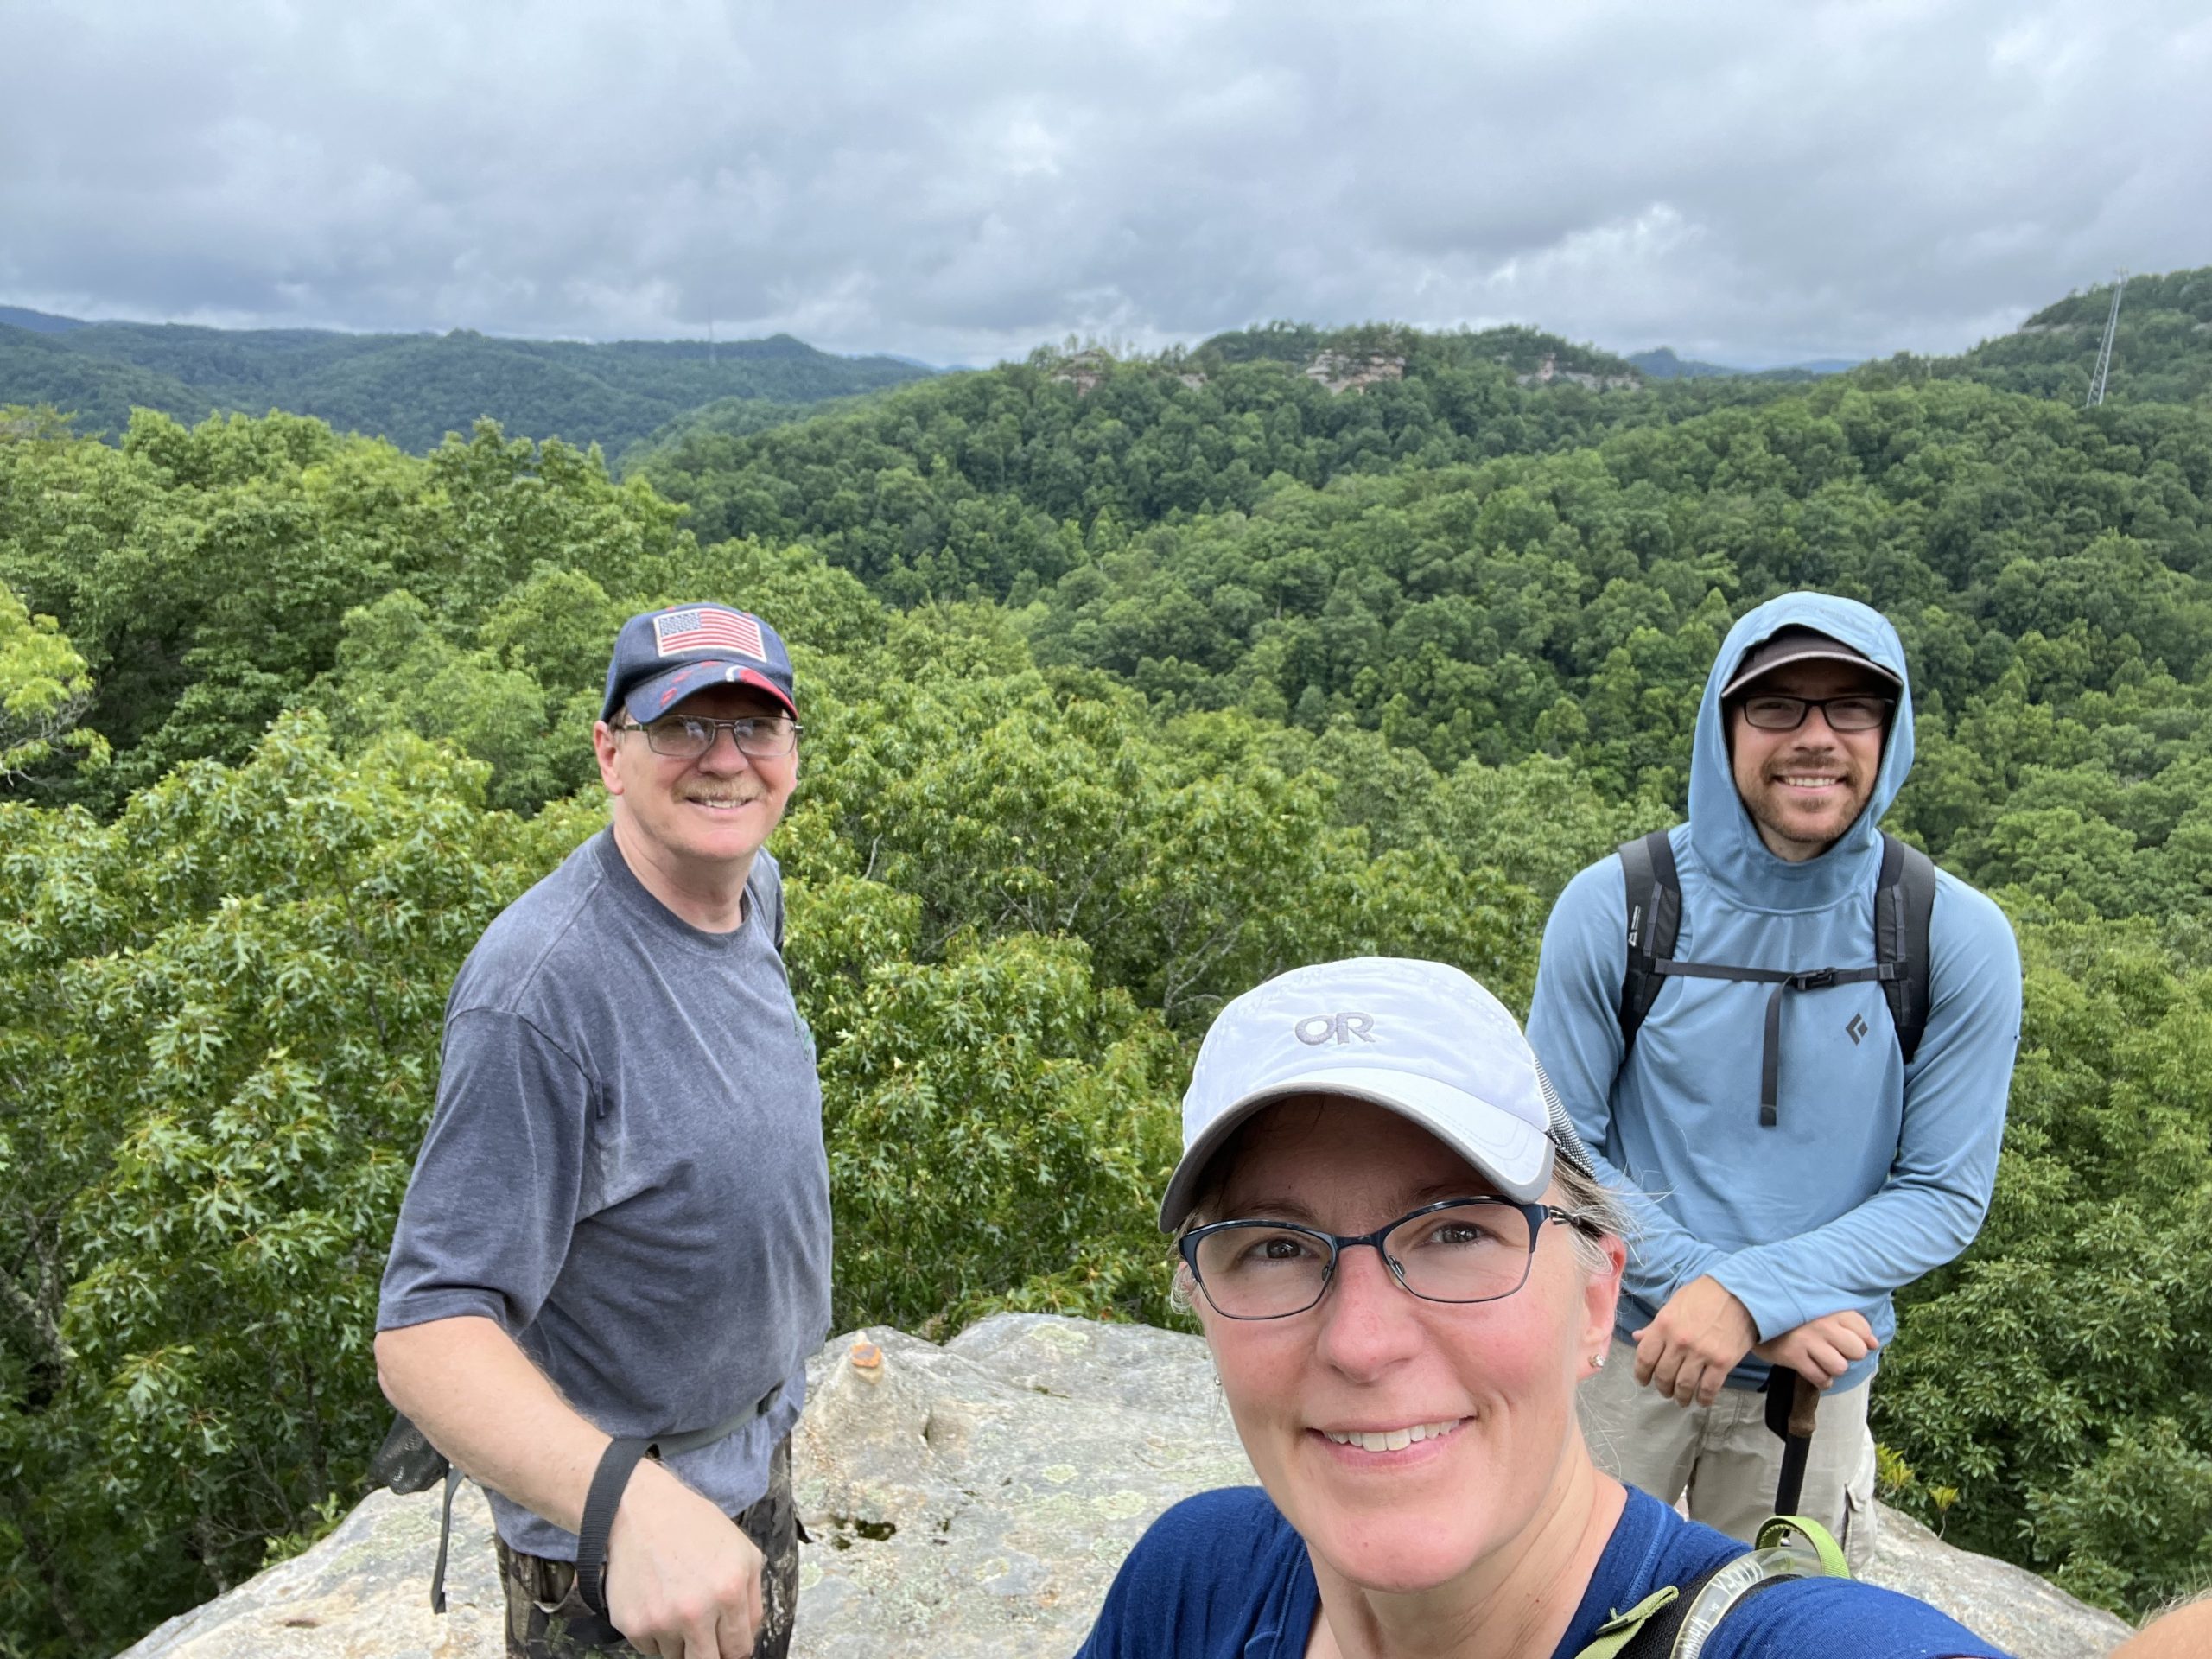 Hikers smiling on a sandstone ridgeline overlook on private property in Daniel Boone National Forest